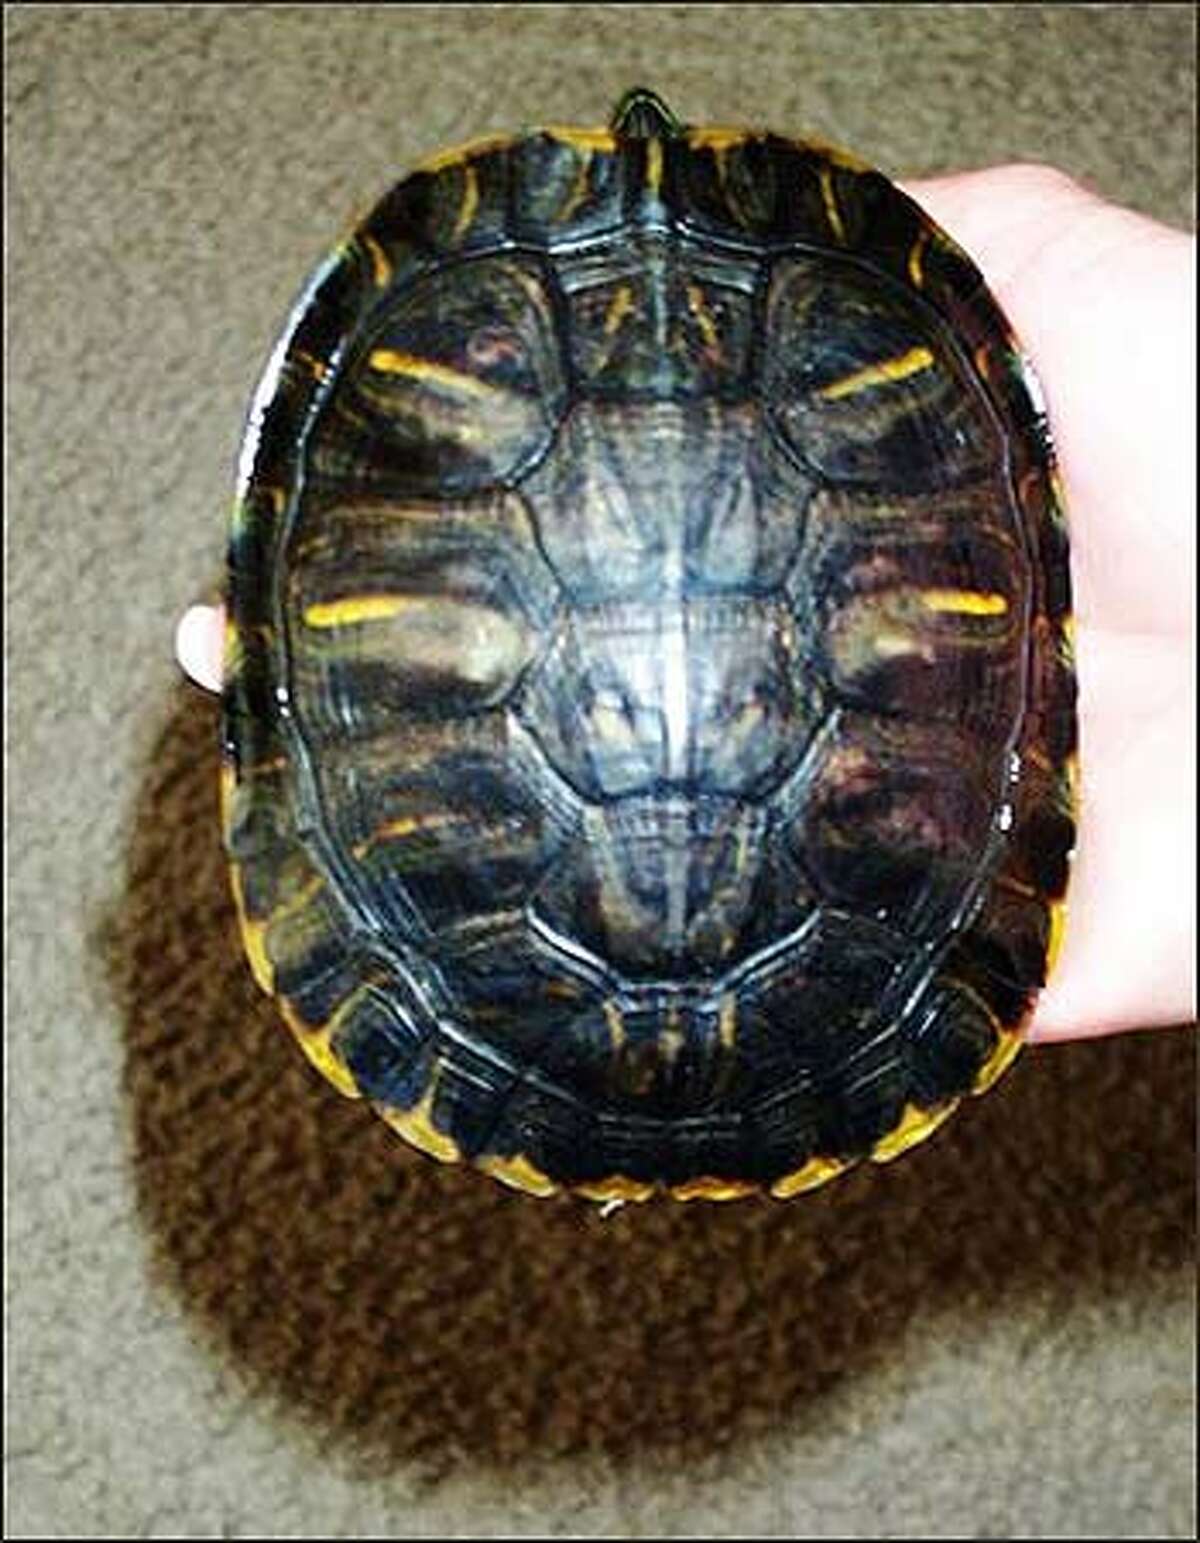 The shell of Lucky, a turtle, is shown, Thursday, March 17, 2005, in Michigantown, Ind. Dora's pet shop owners Marsha and Bryan Dora say the likeness of Satan emerged on Lucky's shell following an Oct. 13, 2004, fire in downtown Frankfort, Ind. The fire destroyed the pet store as well as an entire city block. Lucky was the only animal that survived the pet shop fire. The Doras plan to market a DVD about their pet shop and Lucky. (AP Photo/The Frankfort Times, Janis Thornton)